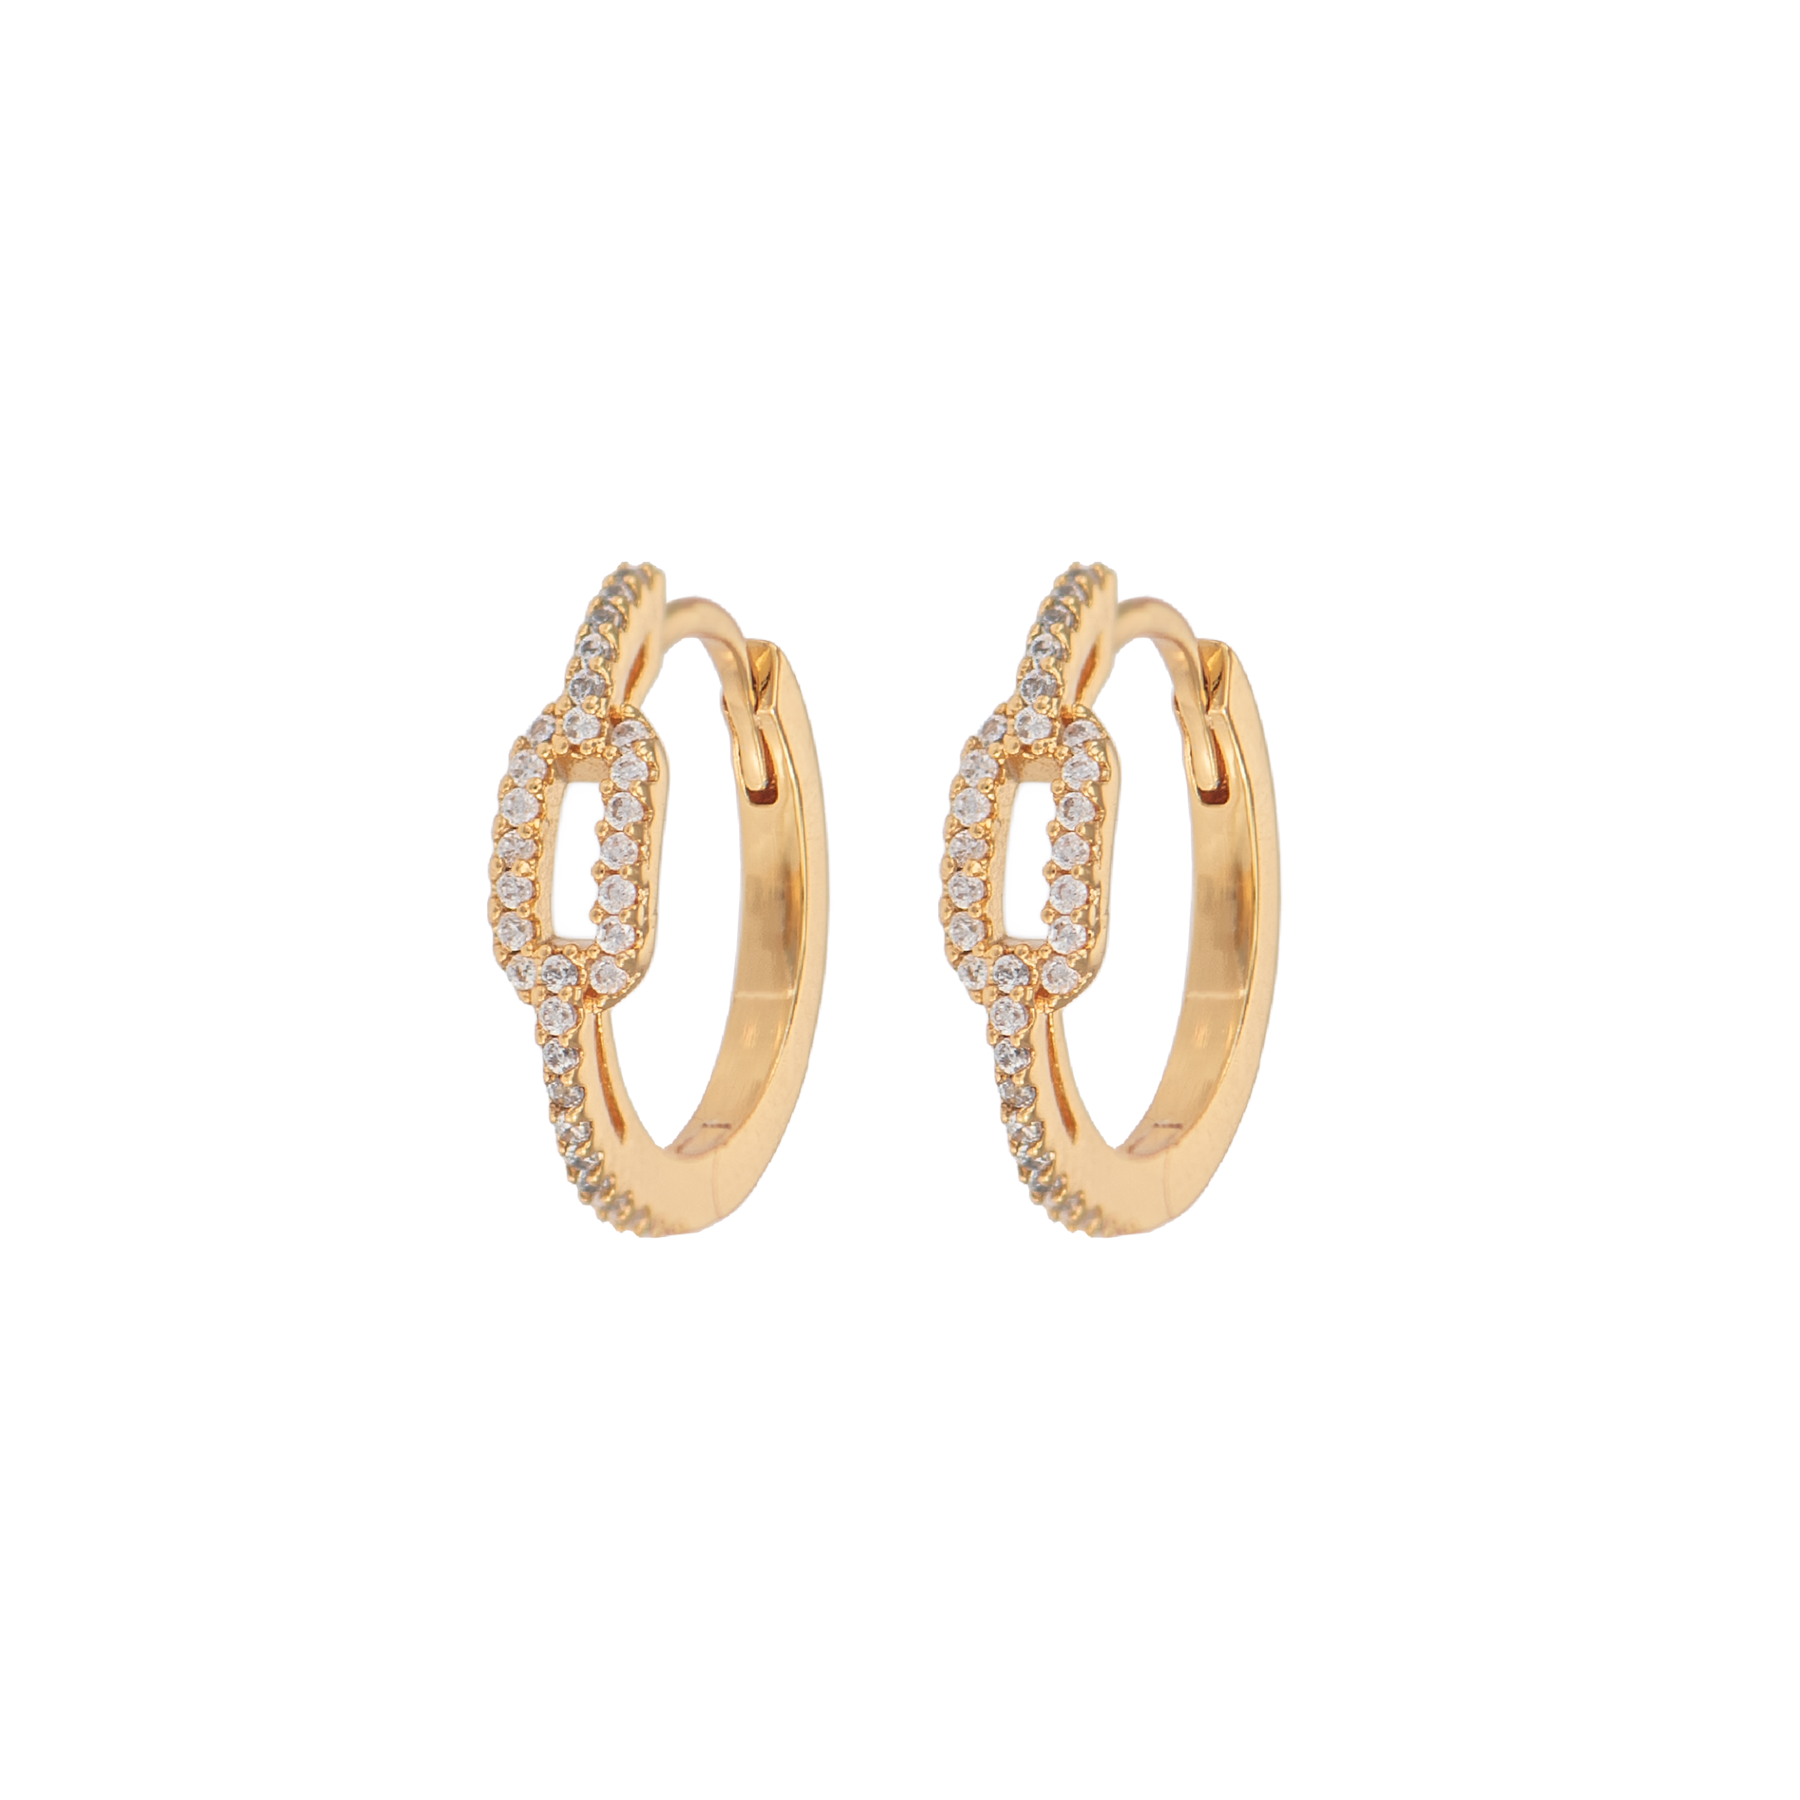 Image of Medium Chain hoops from Emilia by Bon Dep